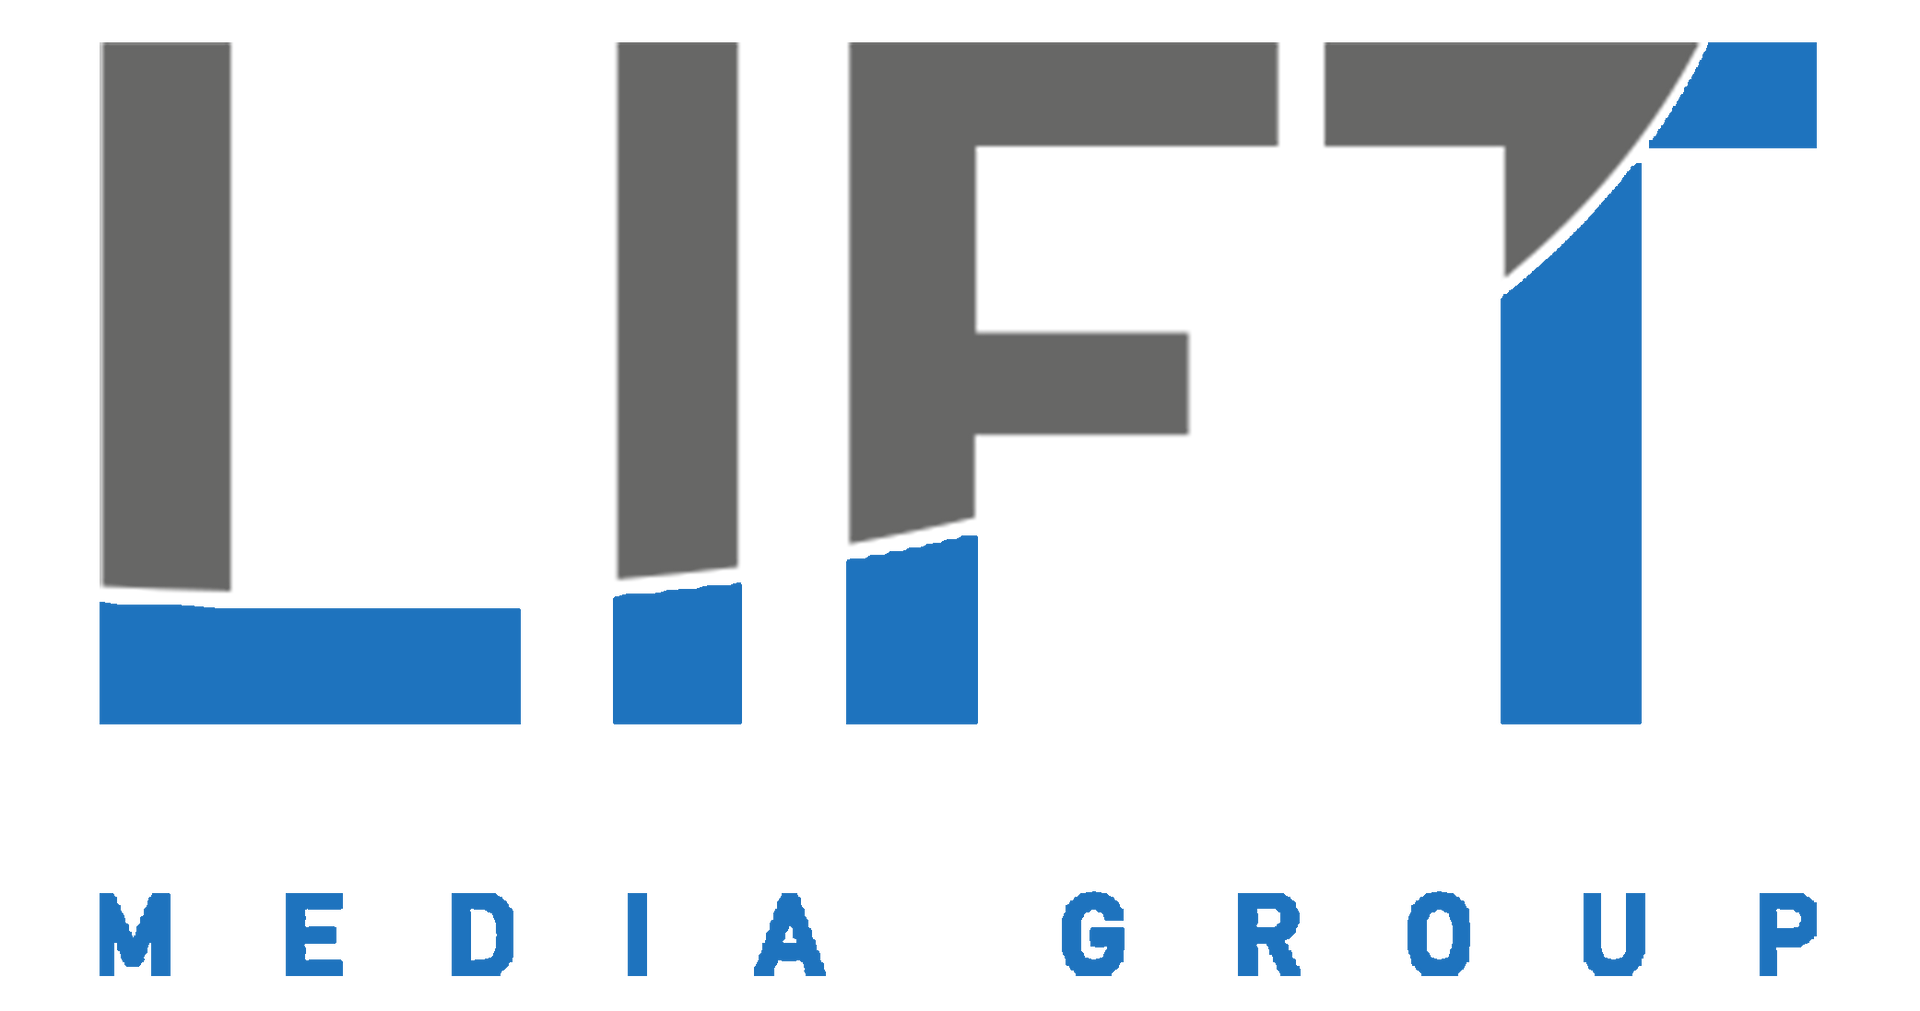 The lift media group logo is blue and gray on a white background.